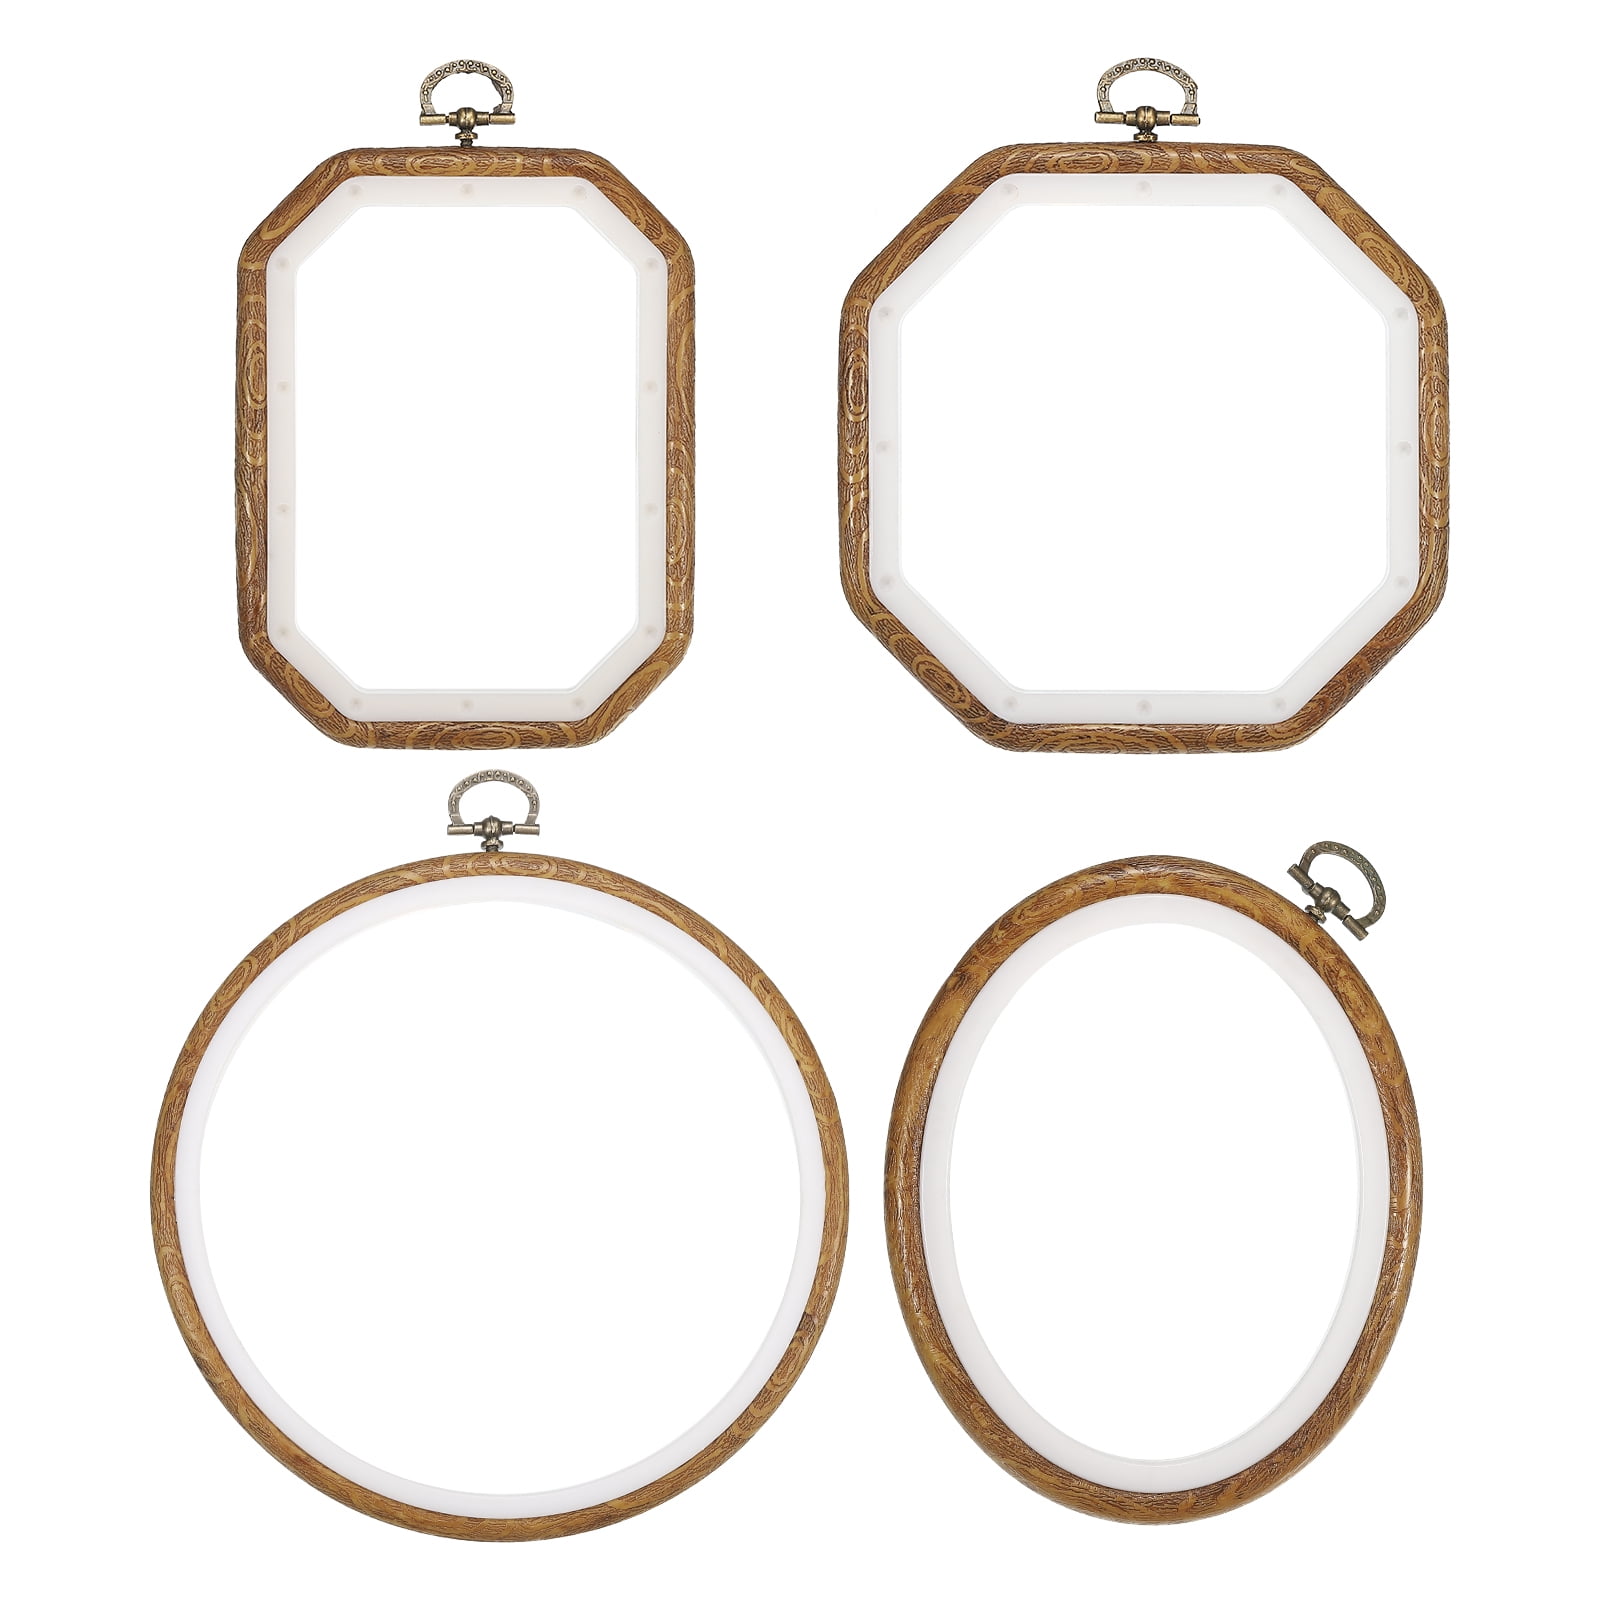 Embroidery Hoops Round Oval Square Cross Stitch Rack Plastic Embroidery Hoop  Frame Rings for DIY Cross Stitch Sewing Craft Tools